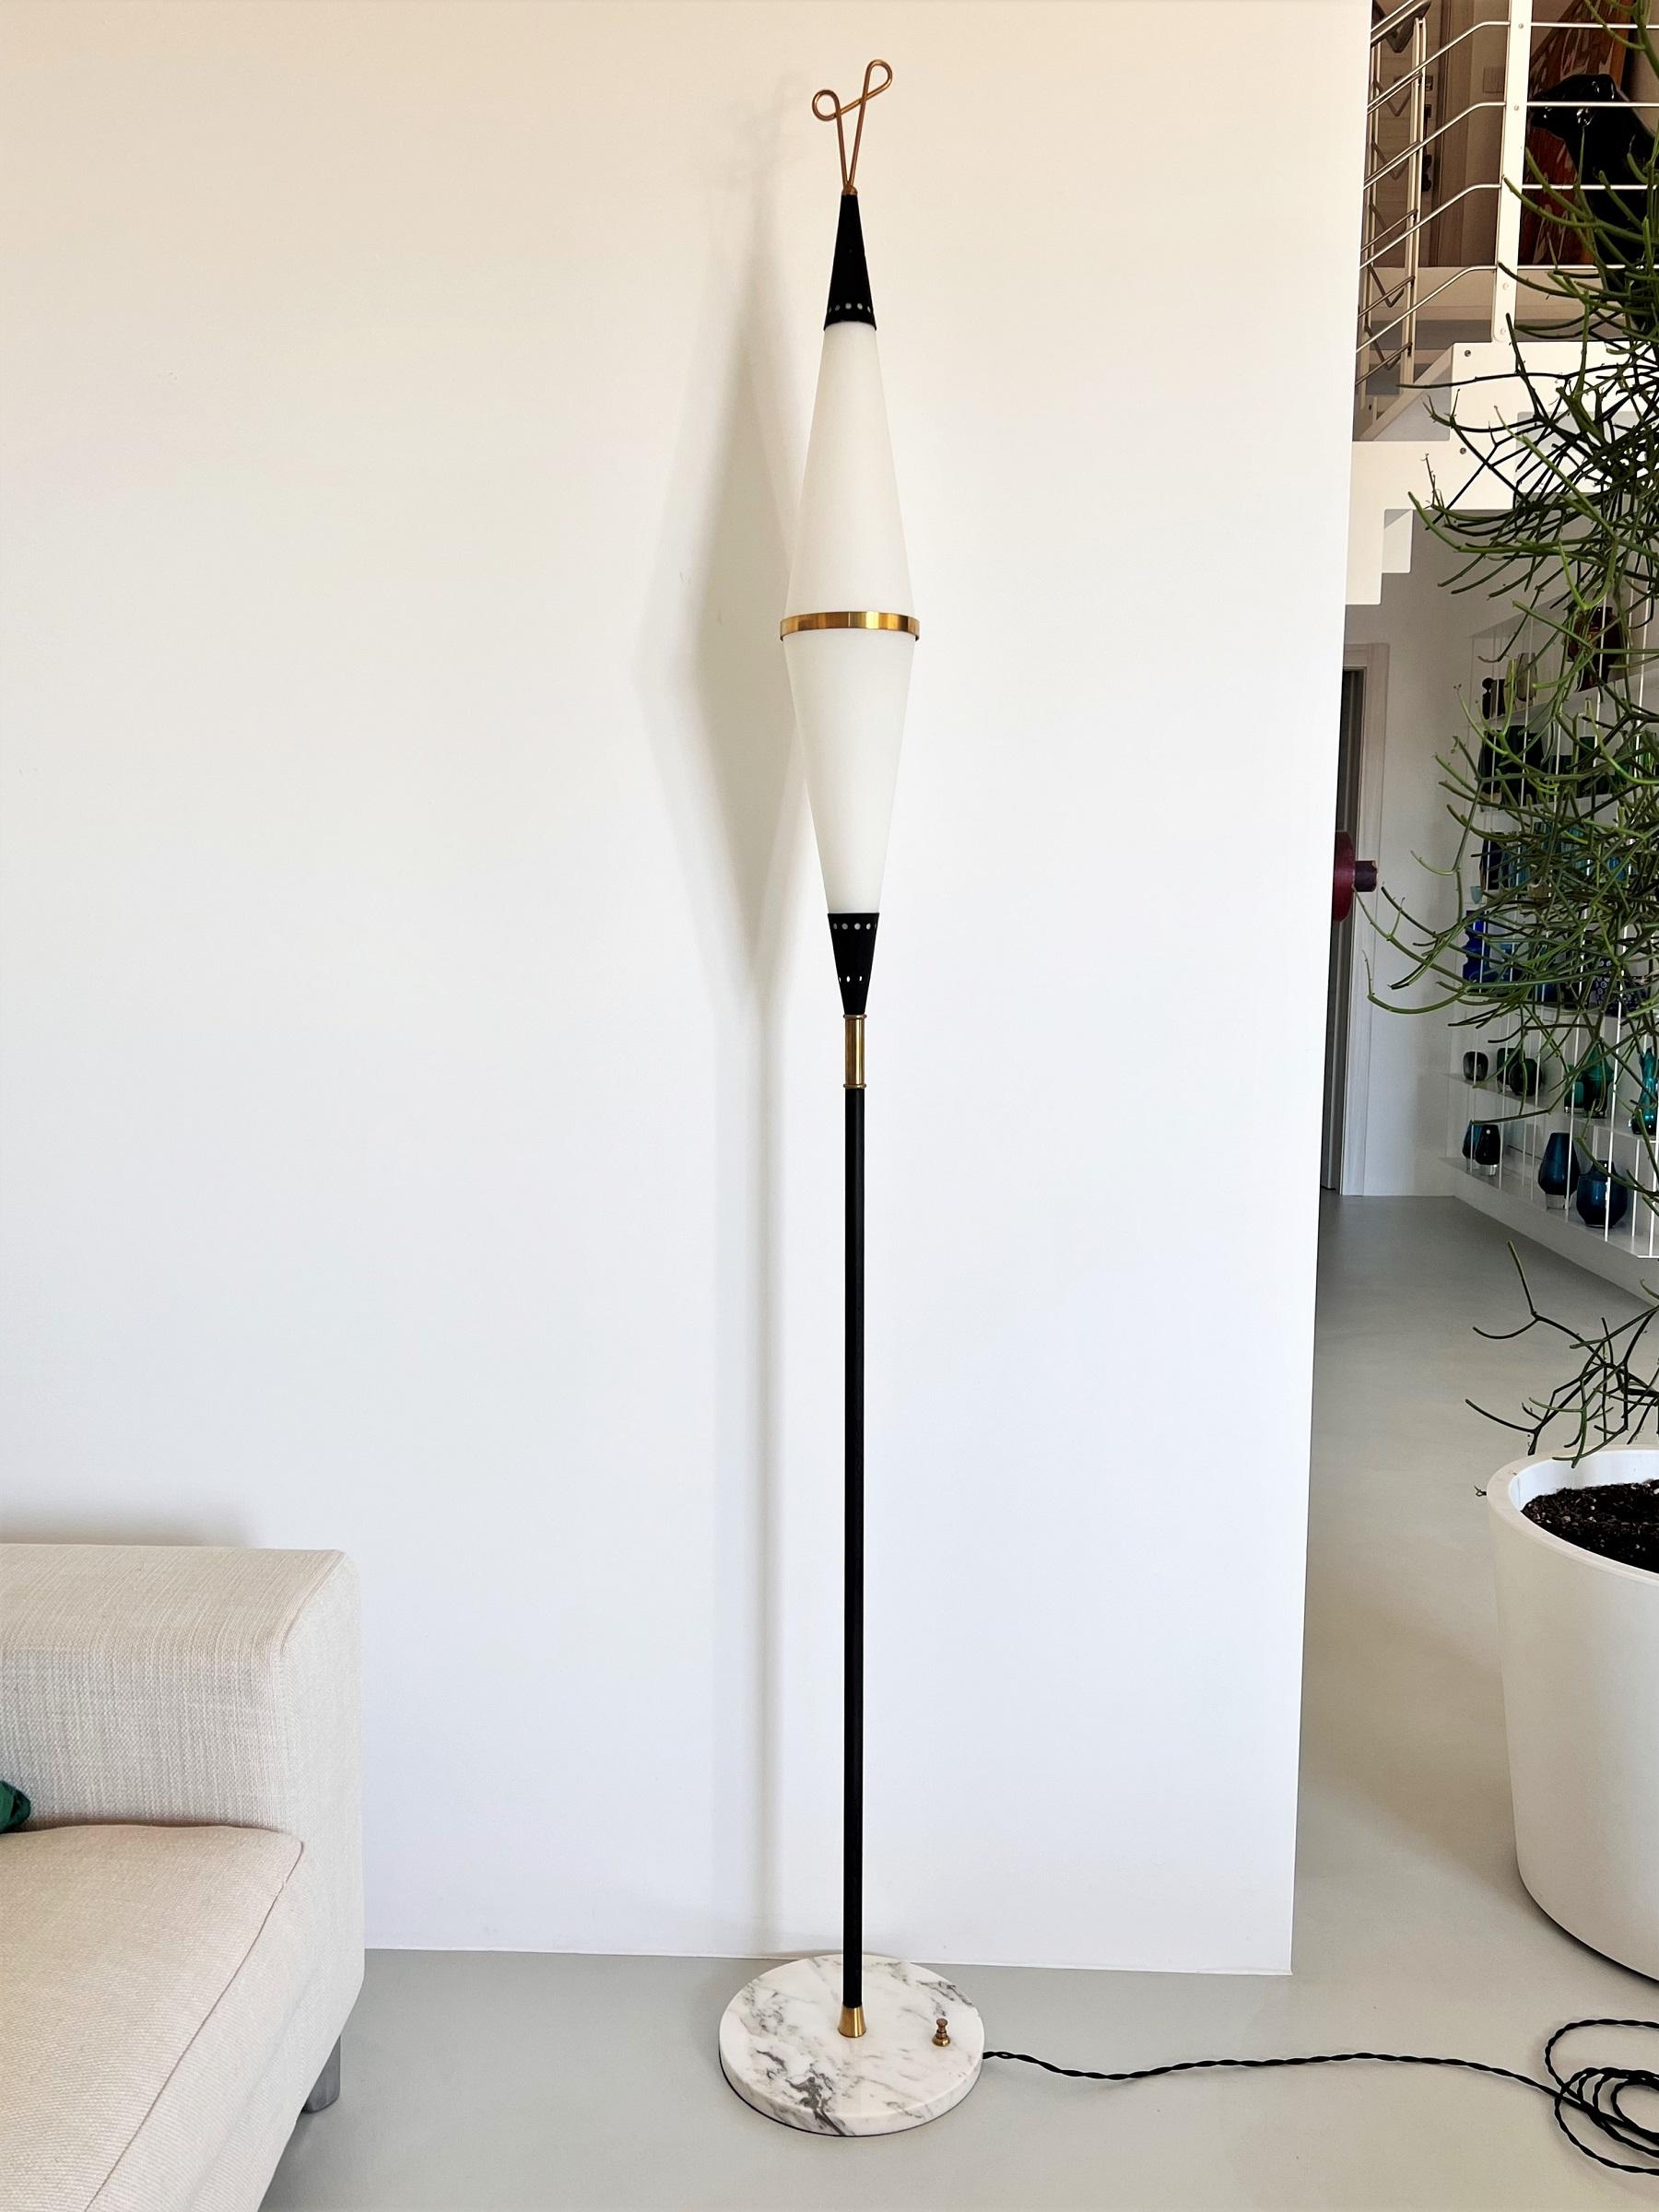 Italian Midcentury Floor Lamp in Glass, Brass and Marble by Reggiani, 1960s For Sale 7